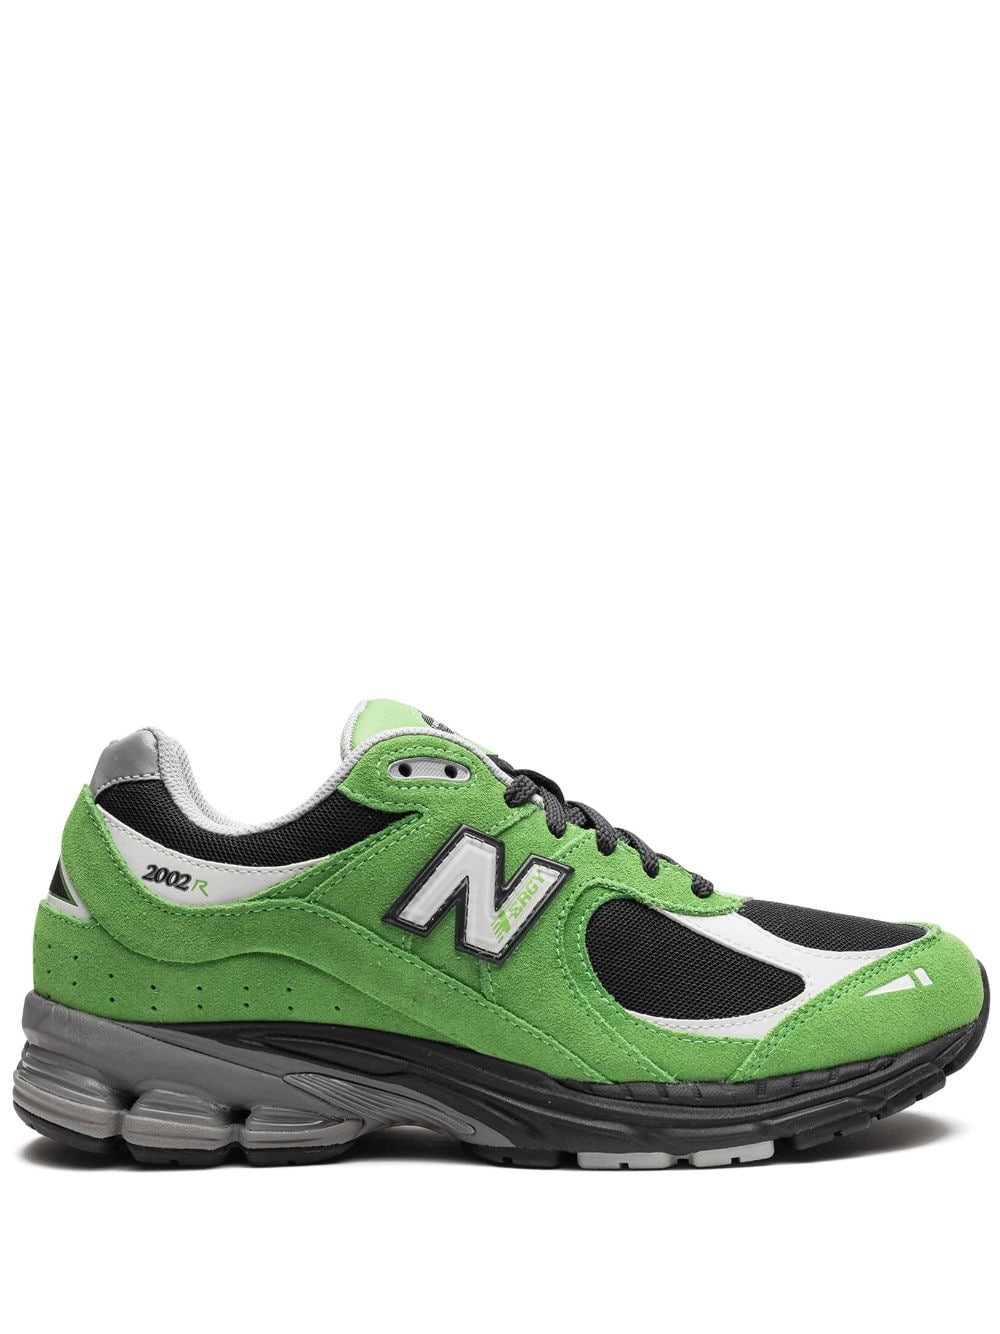 New Balance 2002R "Good Vibes Pack - Green Apple" sneakers von New Balance